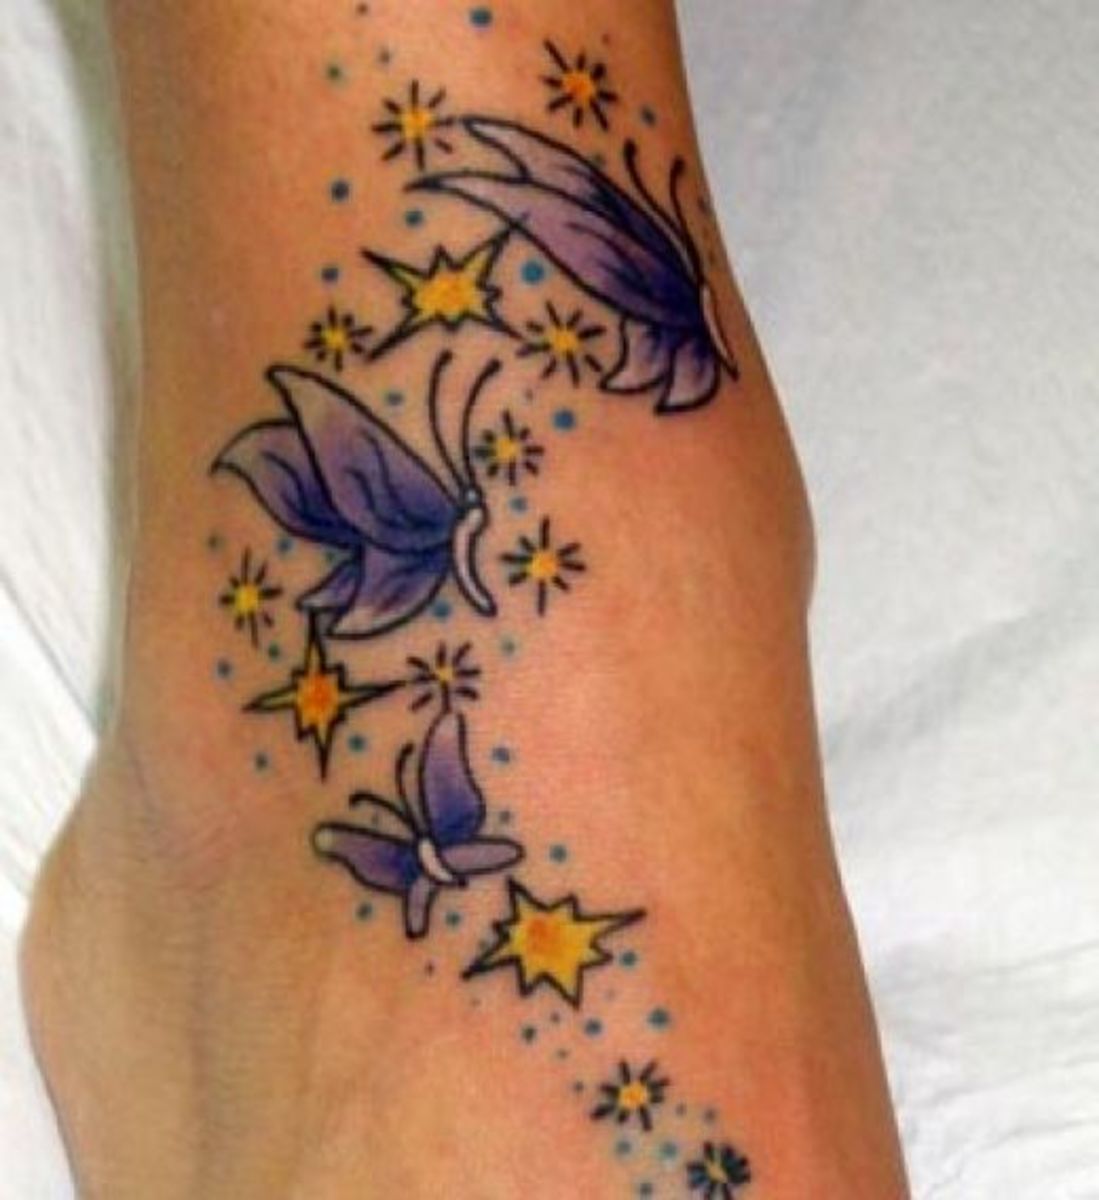 The butterfly is a popular design among women. The purple and yellow go together quite nicely.